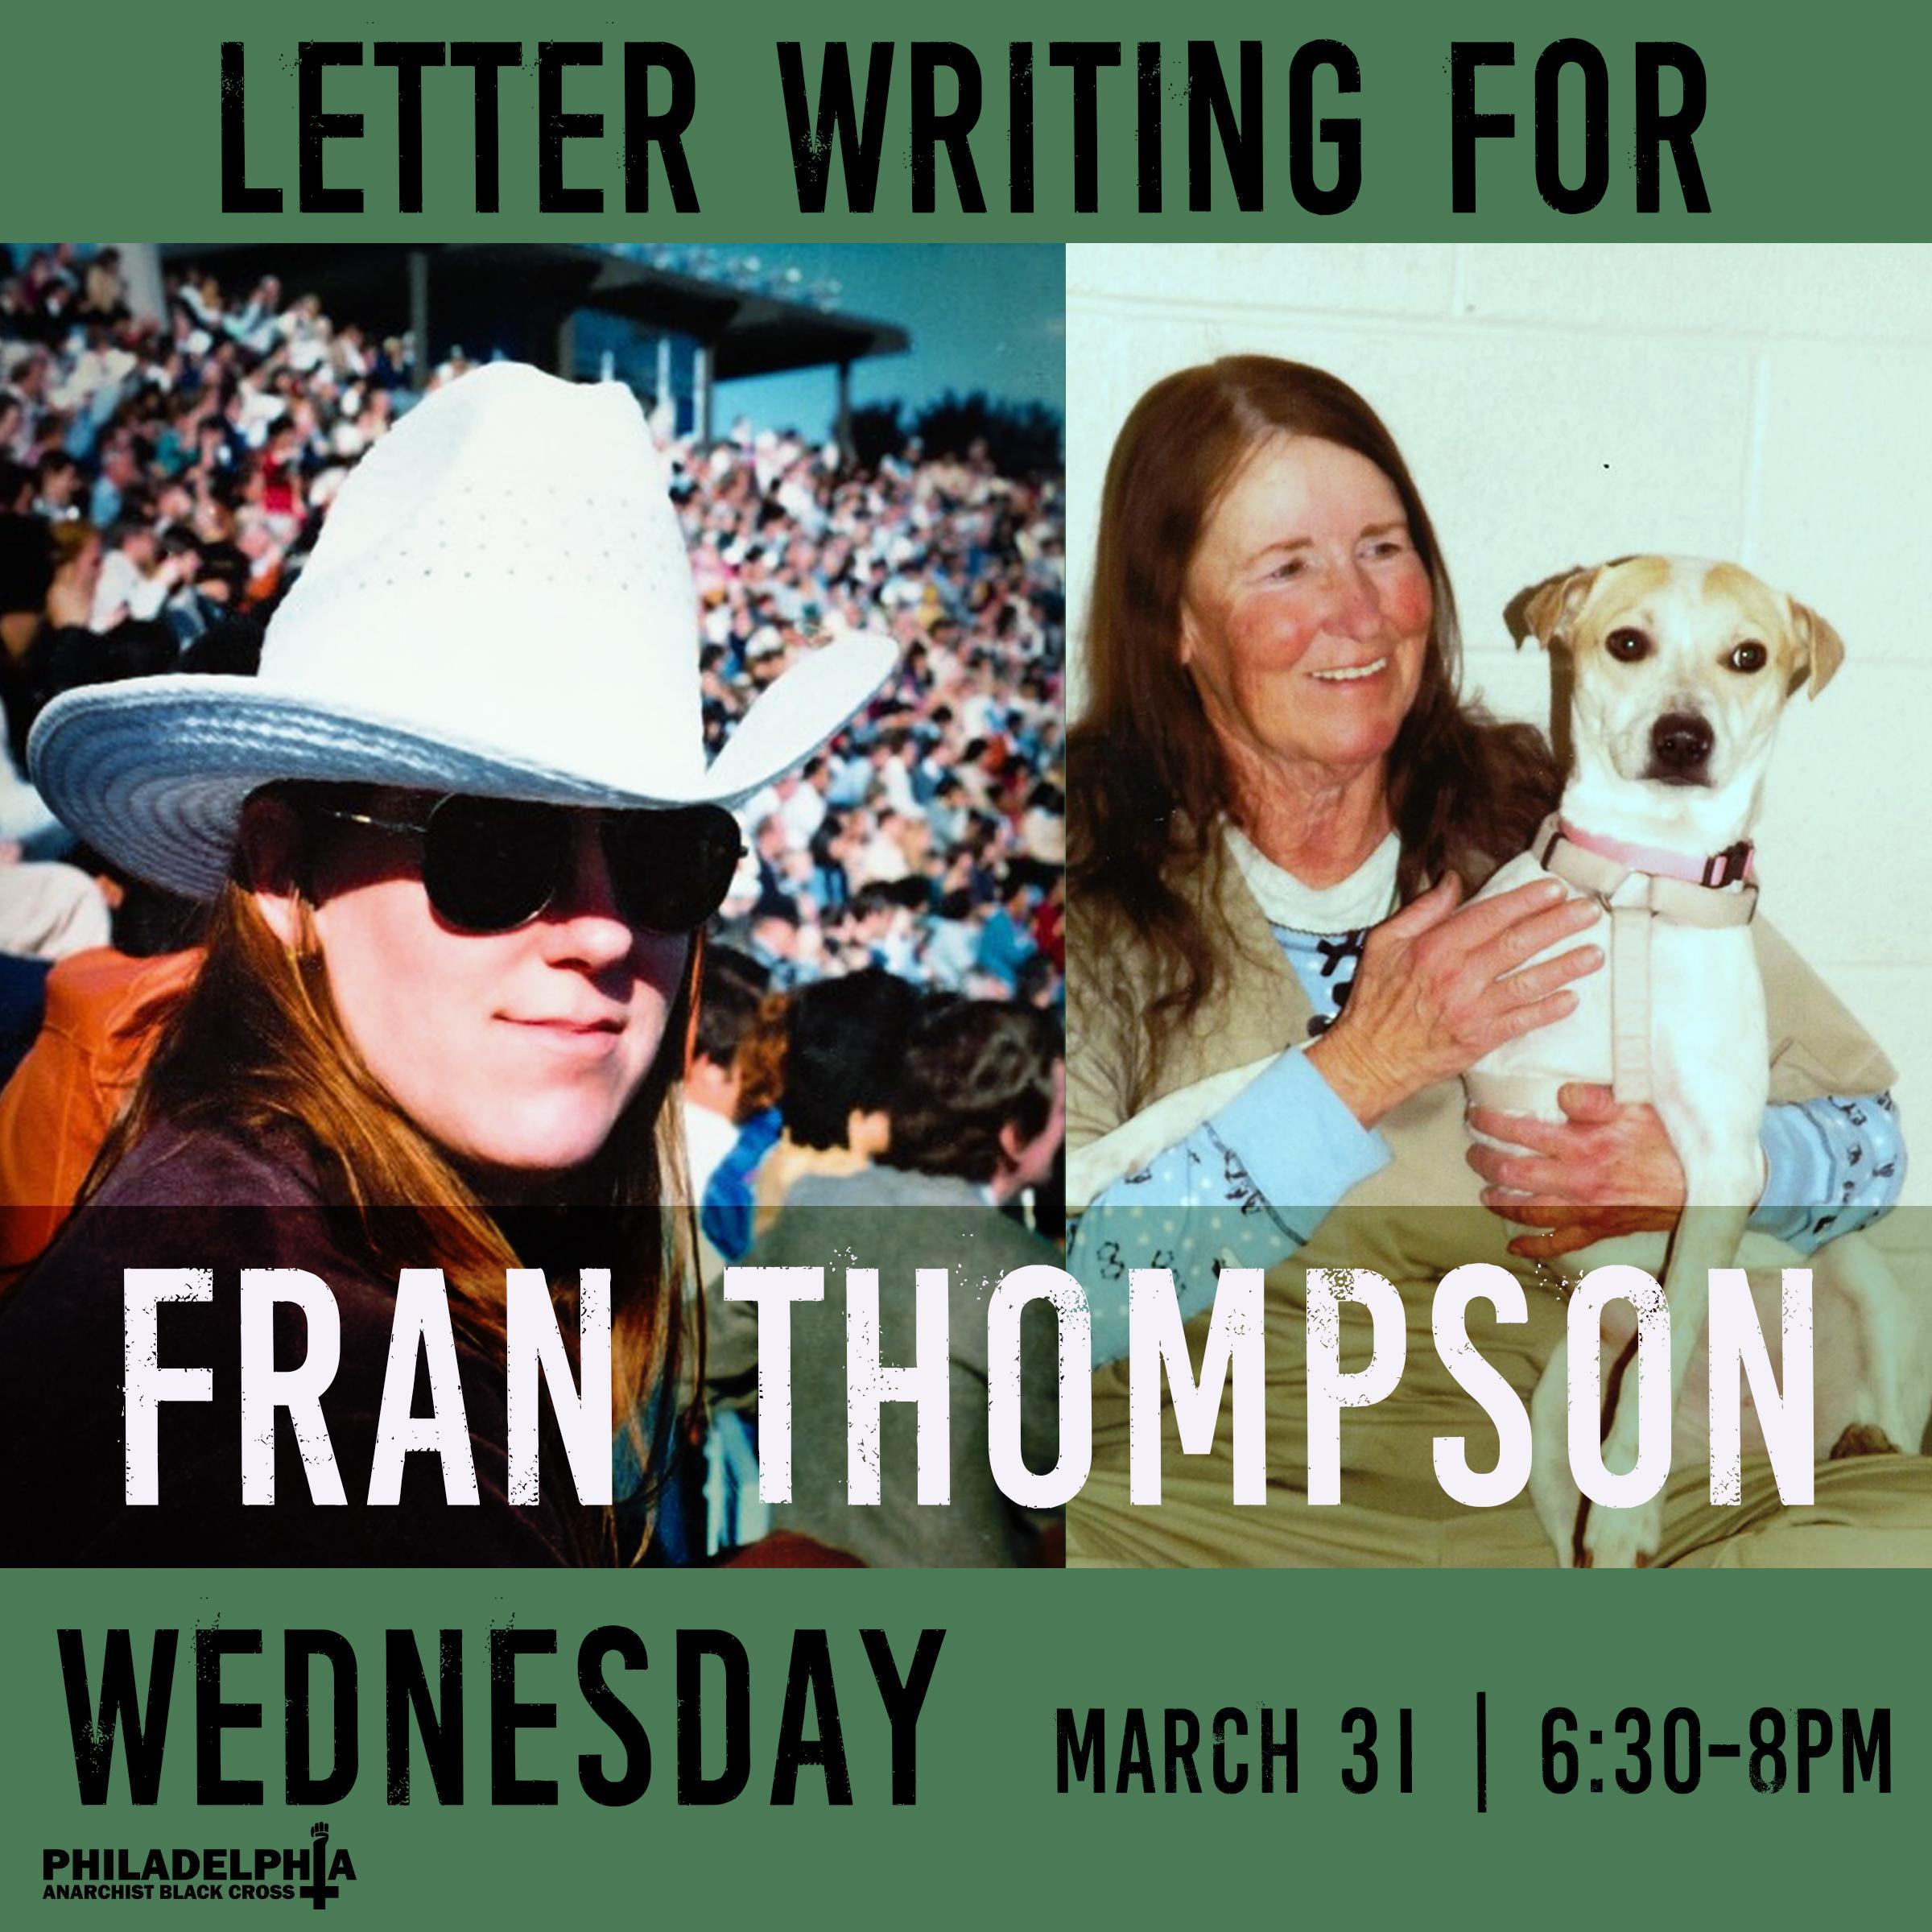 Wednesday March 31st: Letter-writing for Fran Thompson